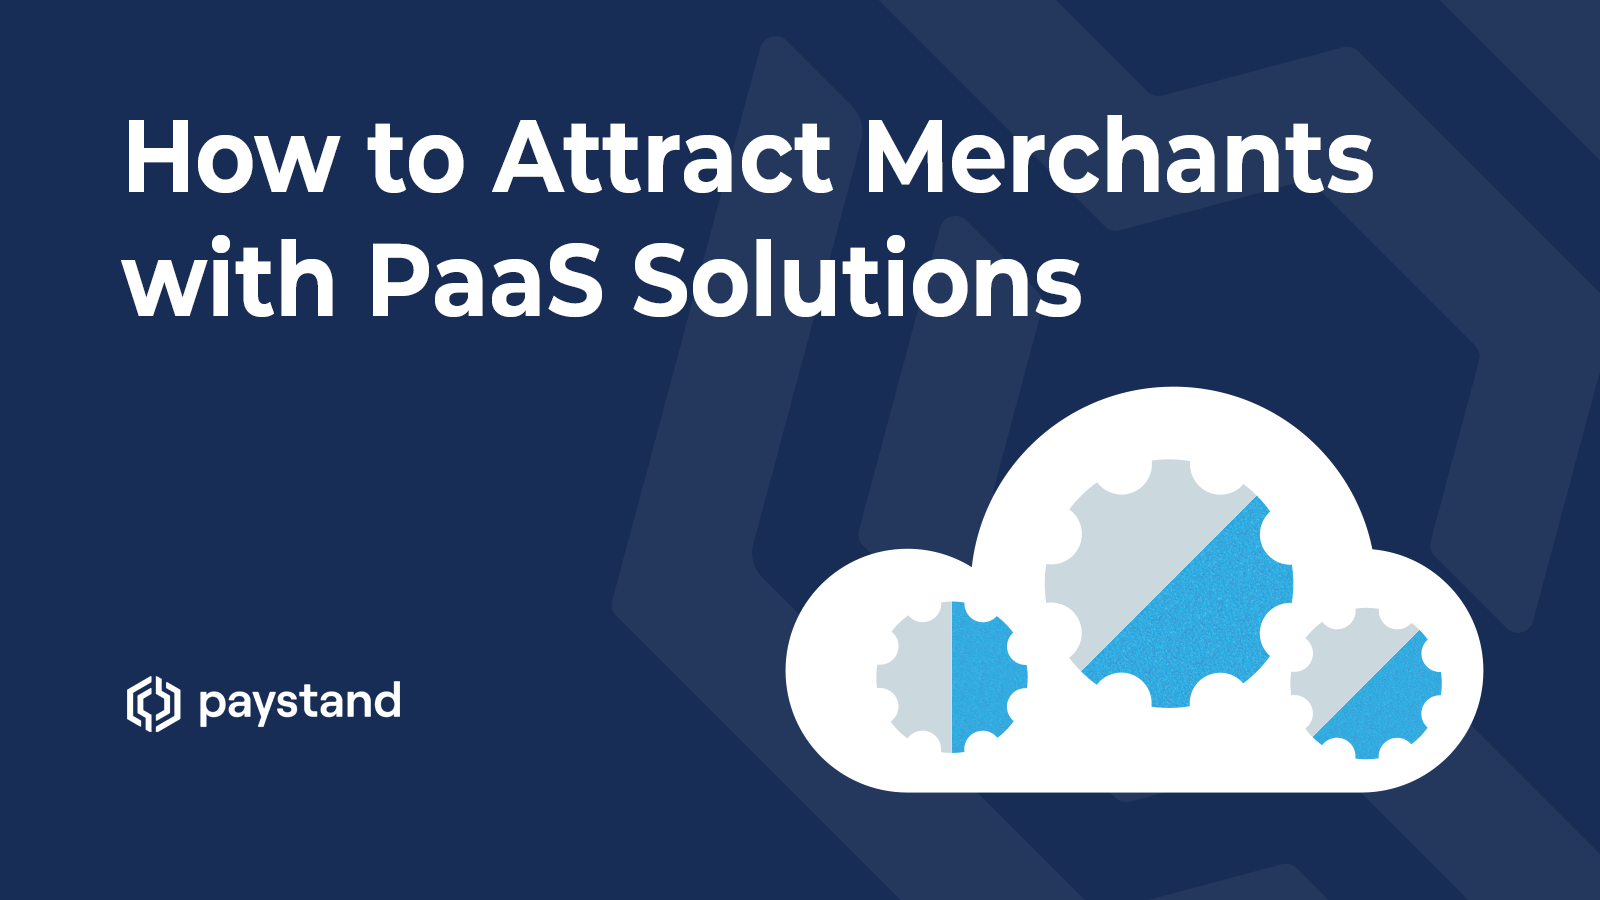 Attracting Merchants with PaaS Solutions